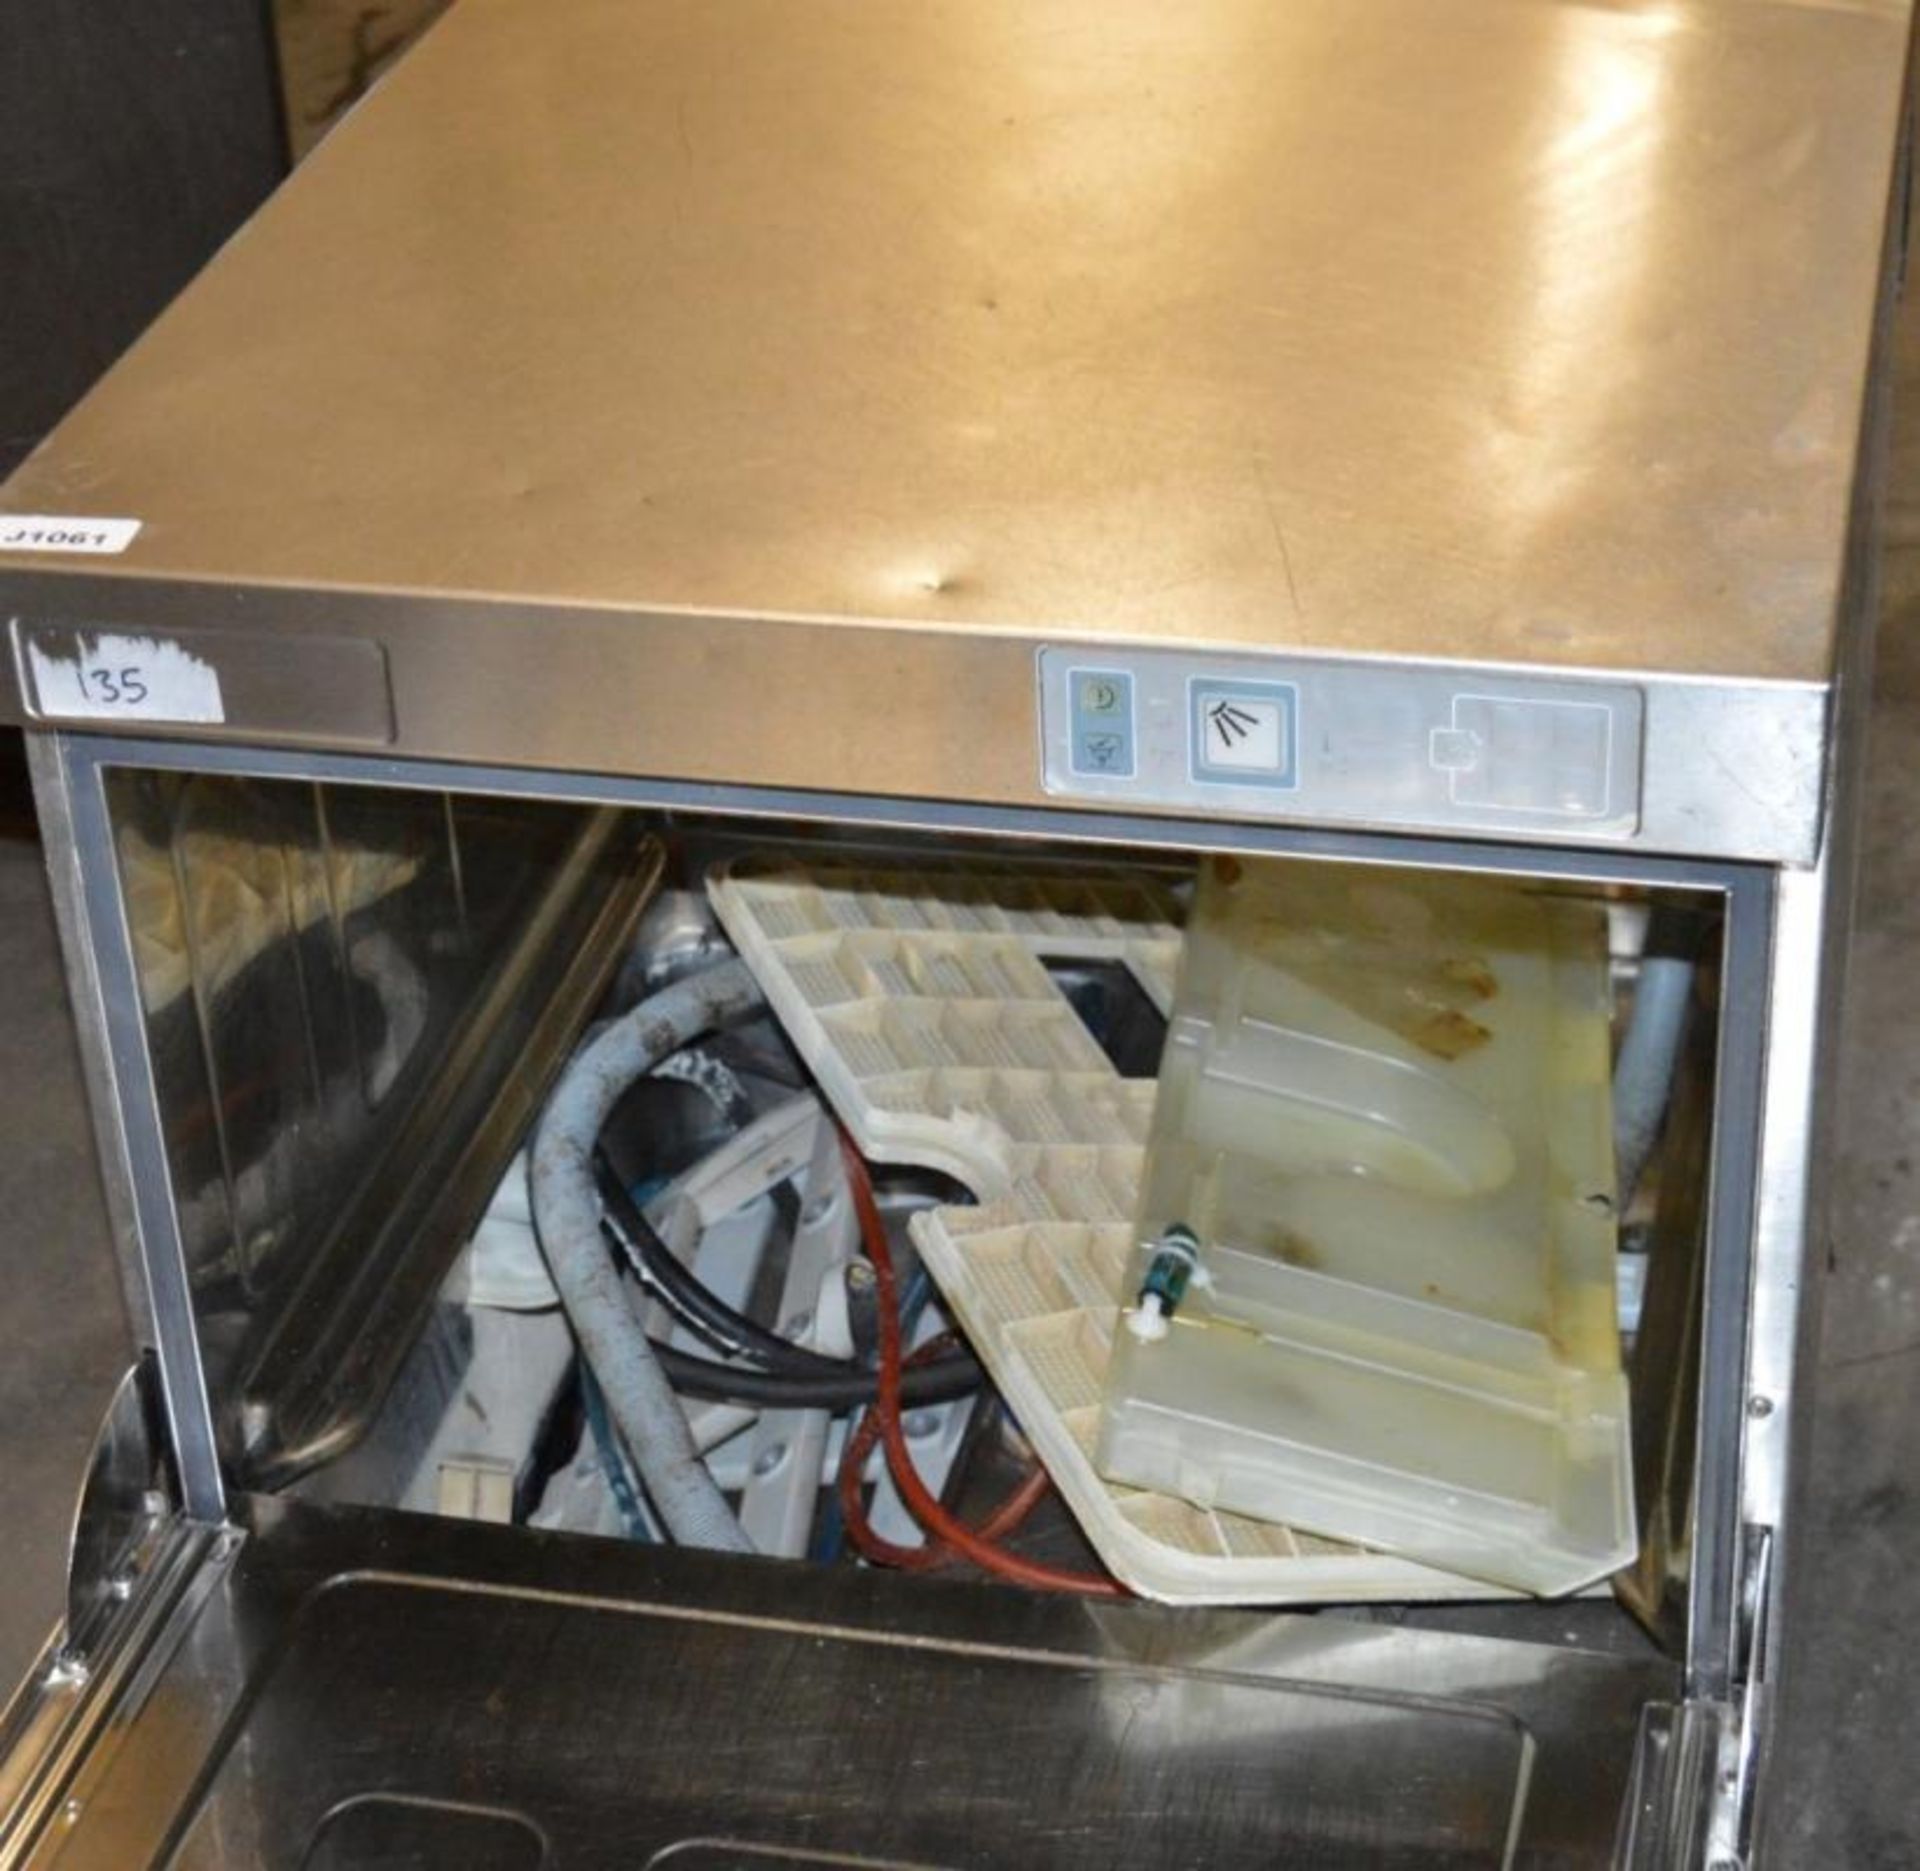 1 x Winterhalter GS Undercounter Commercial Dish Washer - Stainless Steel - 3 Phase - H70 x W60 x D6 - Image 3 of 4